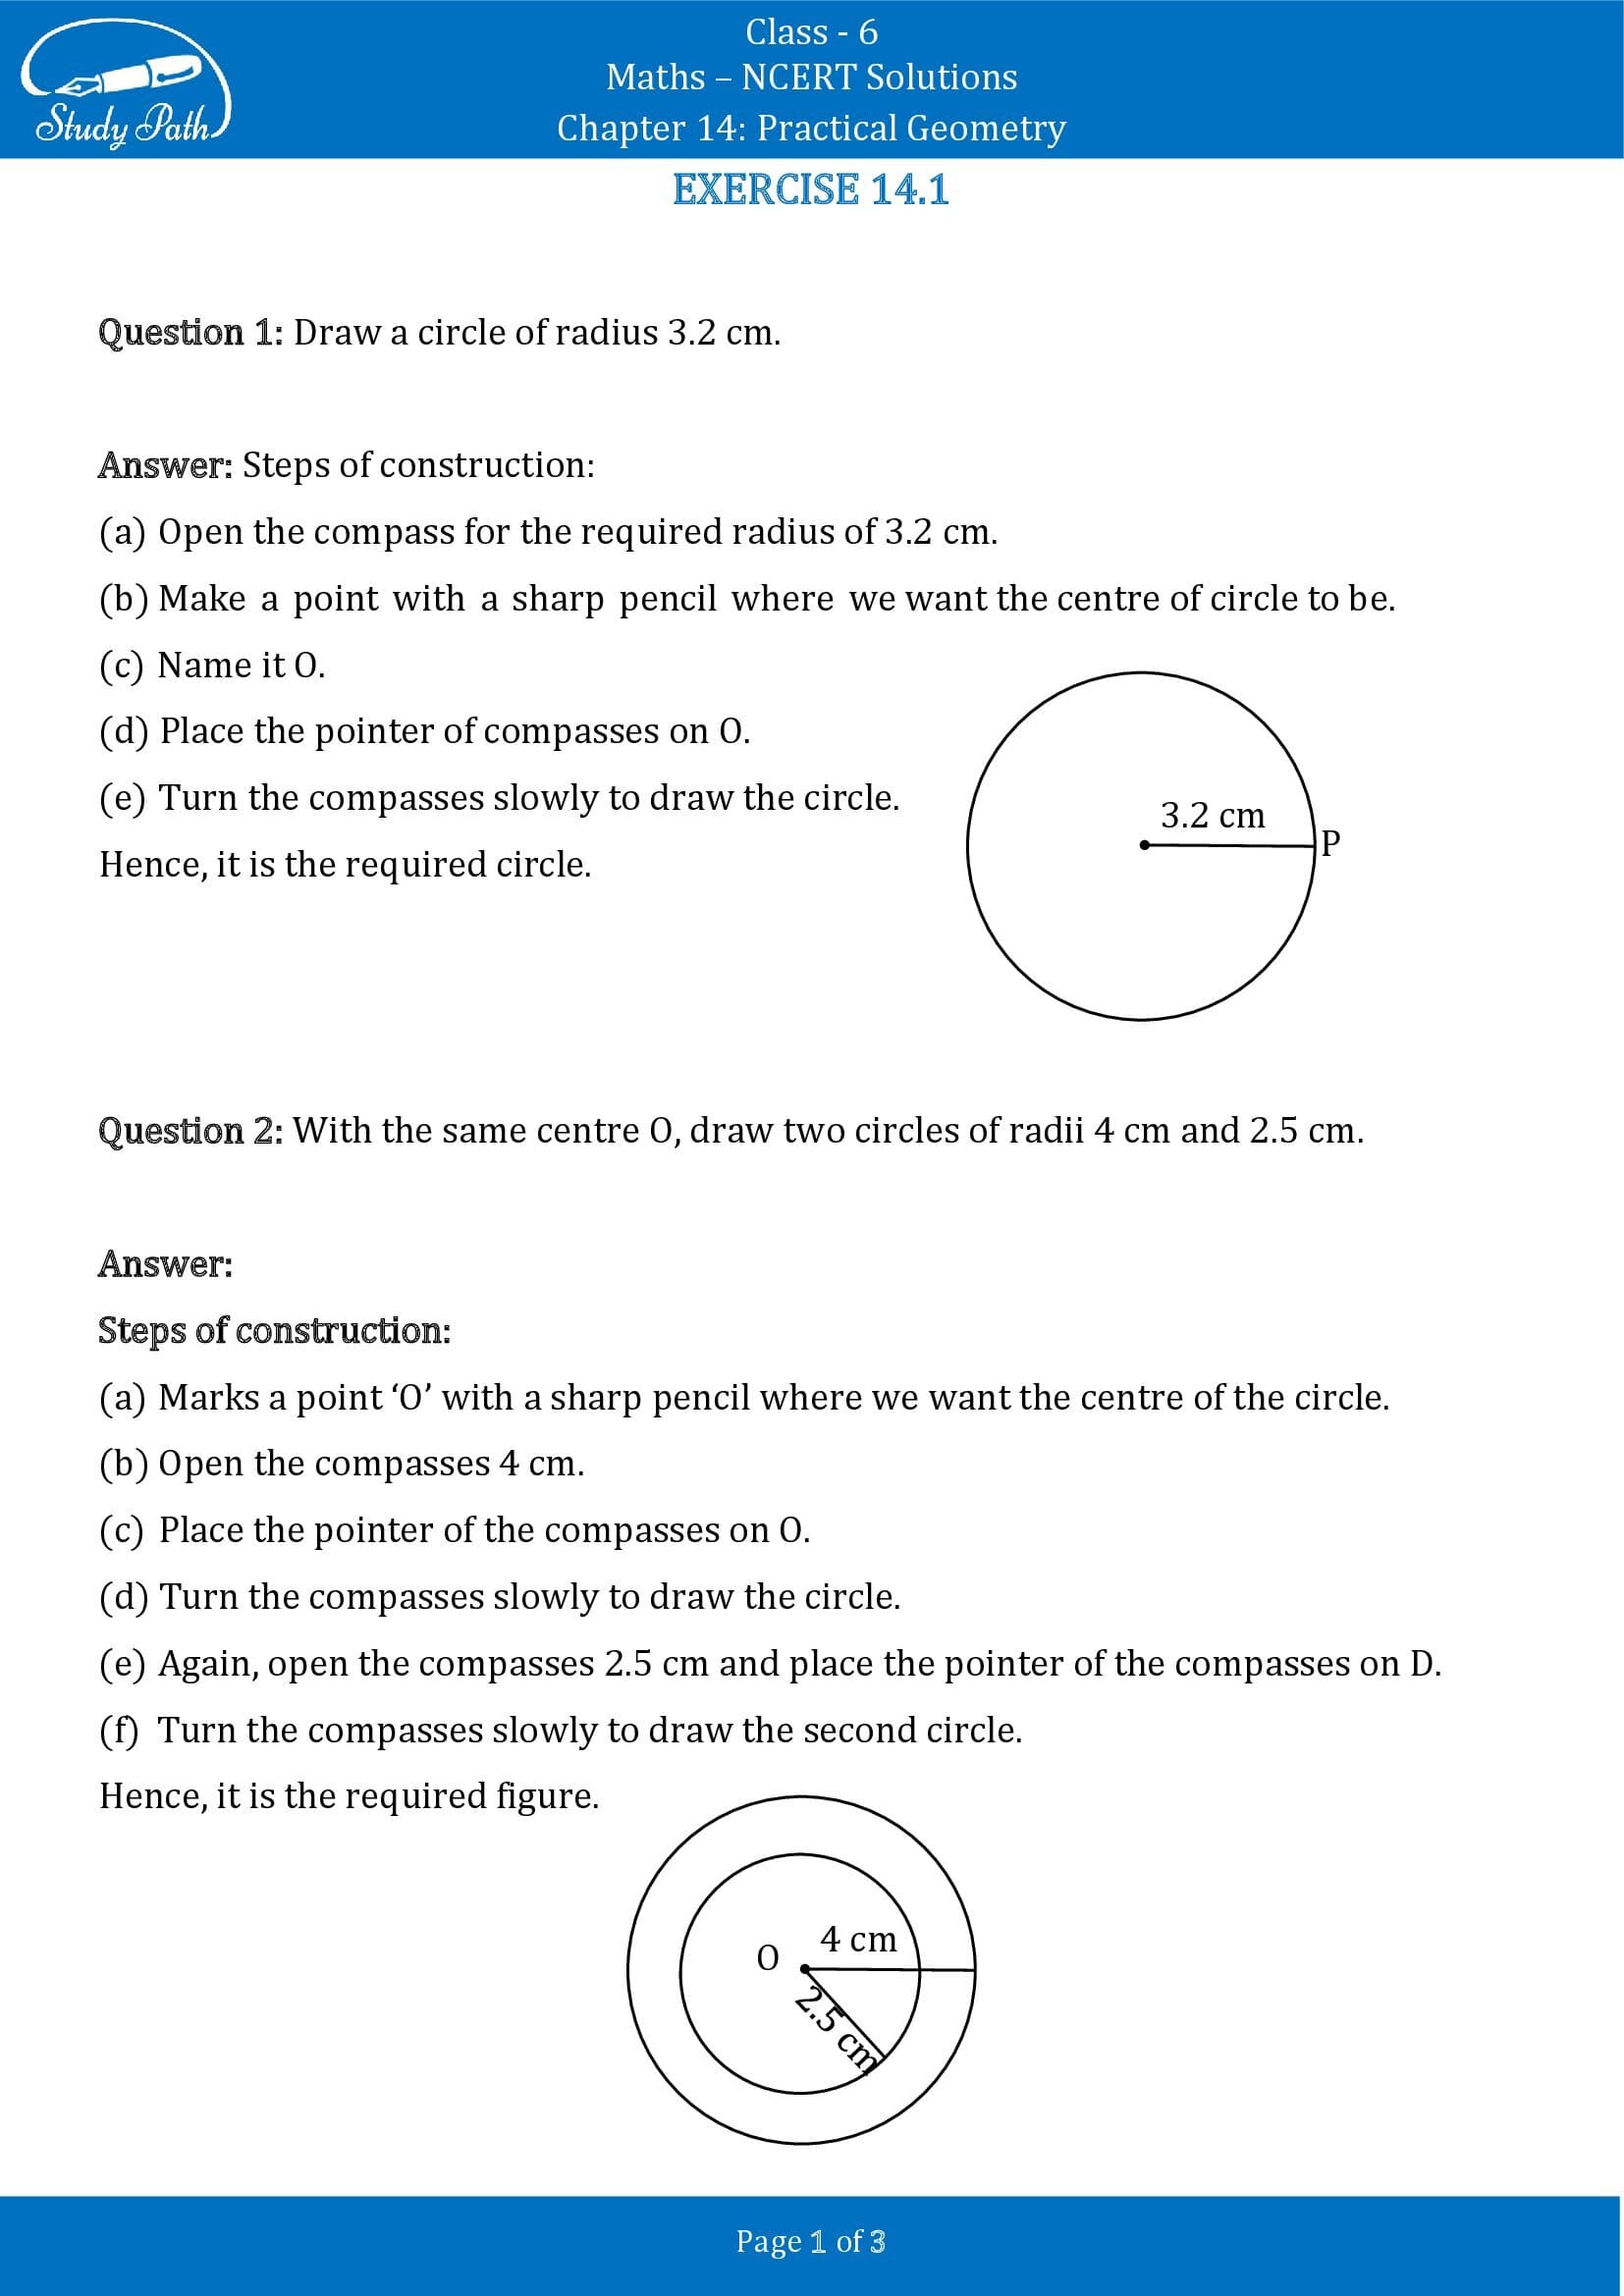 NCERT Solutions for Class 6 Maths Chapter 14 Practical Geometry Exercise 14.1 00001